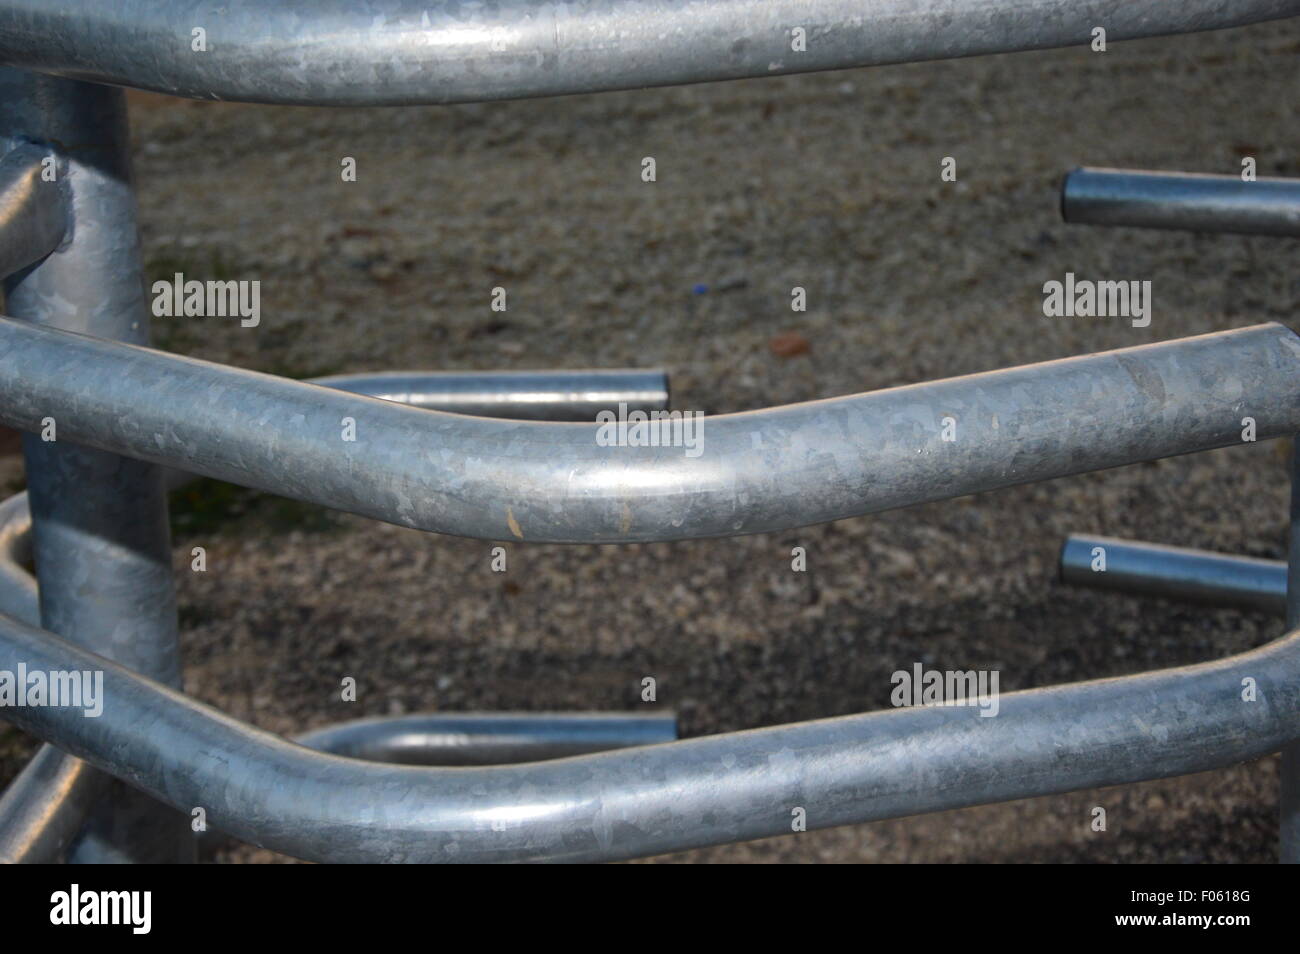 Arched metal pipes installation for a public place entrance. Stock Photo